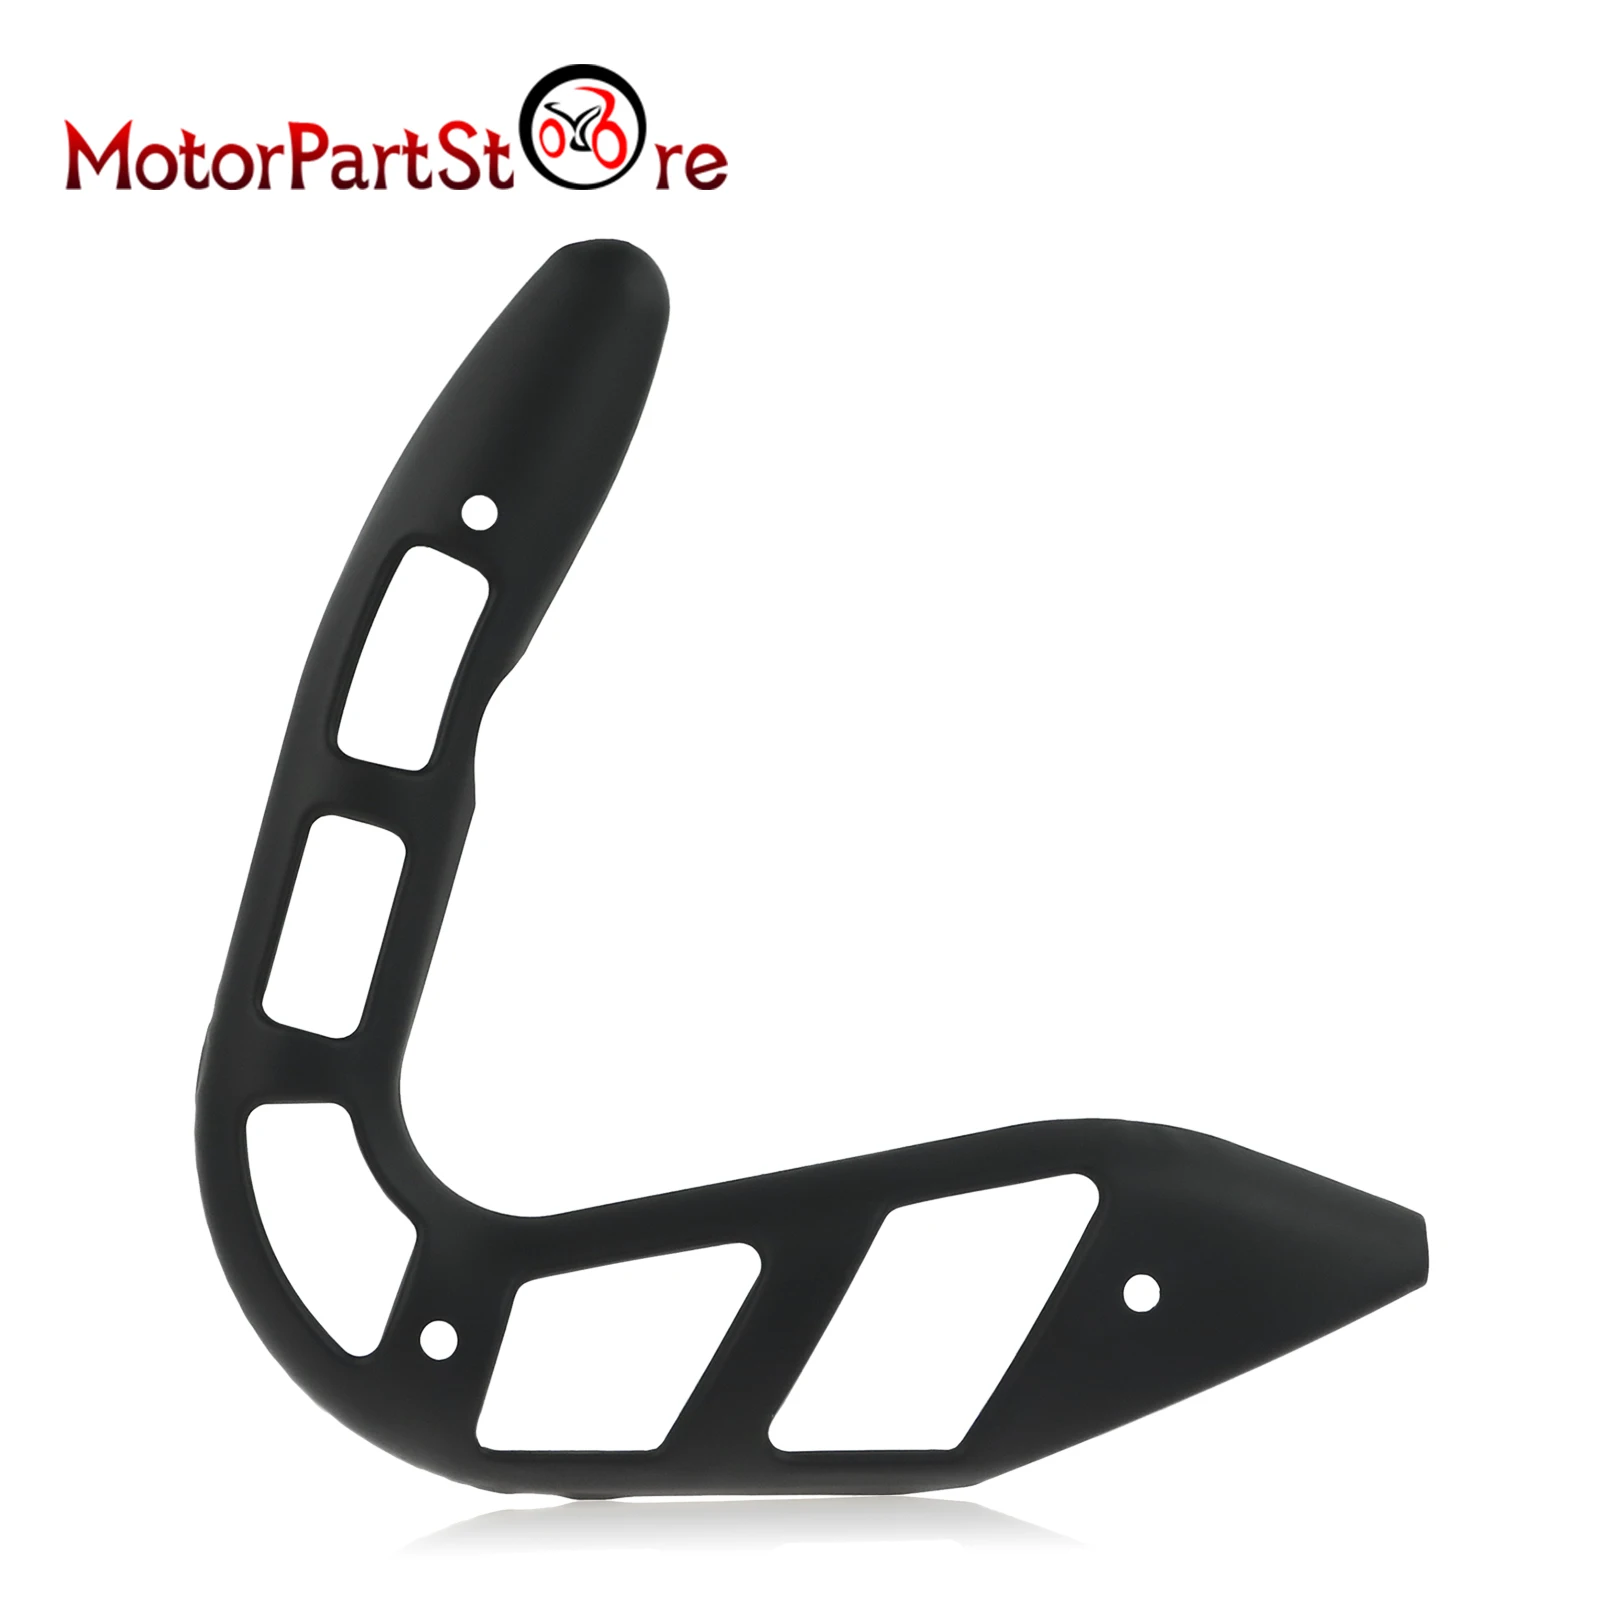 Motorcycle Exhaust Muffler Pipe Heat Shield Cover Guard Protector For Yamaha PW80 PY80 PW PY 80 Peewee80 G80T Dirt Bike